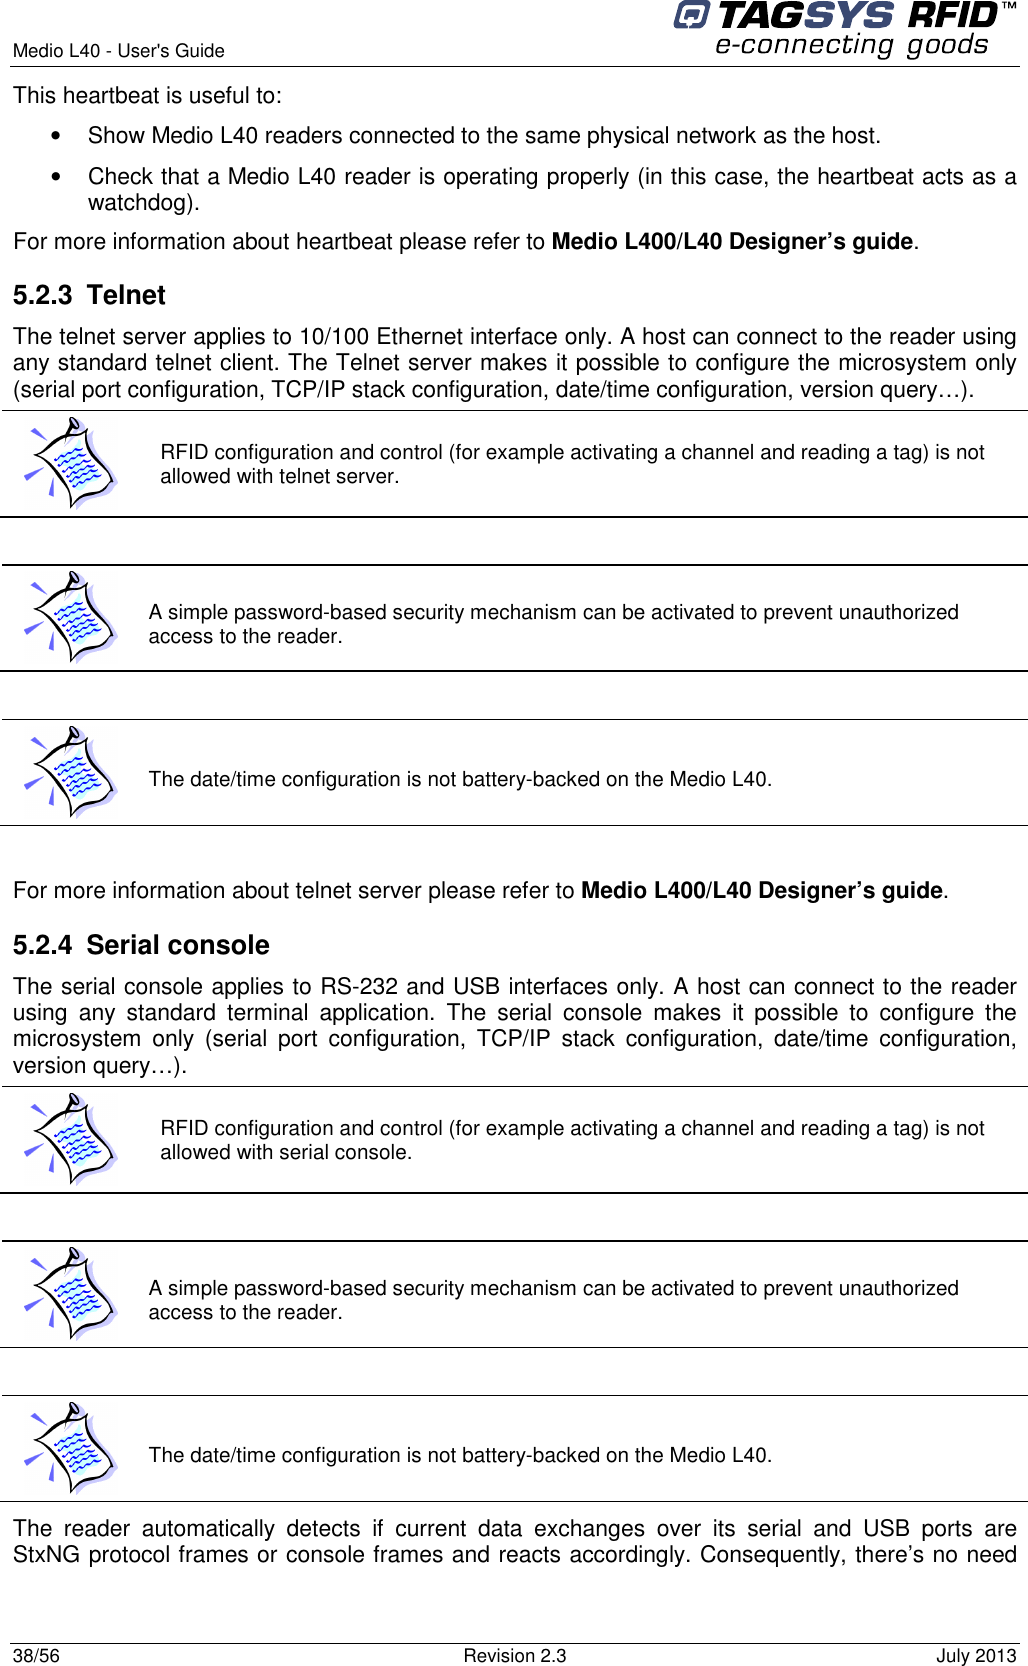  Medio L40 - User&apos;s Guide     38/56  Revision 2.3  July 2013  This heartbeat is useful to:  •  Show Medio L40 readers connected to the same physical network as the host. •  Check that a Medio L40 reader is operating properly (in this case, the heartbeat acts as a watchdog). For more information about heartbeat please refer to Medio L400/L40 Designer’s guide. 5.2.3  Telnet  The telnet server applies to 10/100 Ethernet interface only. A host can connect to the reader using any standard telnet client. The Telnet server makes it possible to configure the microsystem only (serial port configuration, TCP/IP stack configuration, date/time configuration, version query…).    For more information about telnet server please refer to Medio L400/L40 Designer’s guide. 5.2.4  Serial console The serial console applies to RS-232 and USB interfaces only. A host can connect to the reader using  any  standard  terminal  application.  The  serial  console  makes  it  possible  to  configure  the microsystem  only  (serial  port  configuration,  TCP/IP  stack  configuration,  date/time  configuration, version query…).   The  reader  automatically  detects  if  current  data  exchanges  over  its  serial  and  USB  ports  are StxNG protocol frames or console frames and reacts accordingly. Consequently, there’s no need  RFID configuration and control (for example activating a channel and reading a tag) is not allowed with telnet server.  A simple password-based security mechanism can be activated to prevent unauthorized access to the reader.  The date/time configuration is not battery-backed on the Medio L40.  RFID configuration and control (for example activating a channel and reading a tag) is not allowed with serial console.  A simple password-based security mechanism can be activated to prevent unauthorized access to the reader.  The date/time configuration is not battery-backed on the Medio L40. 